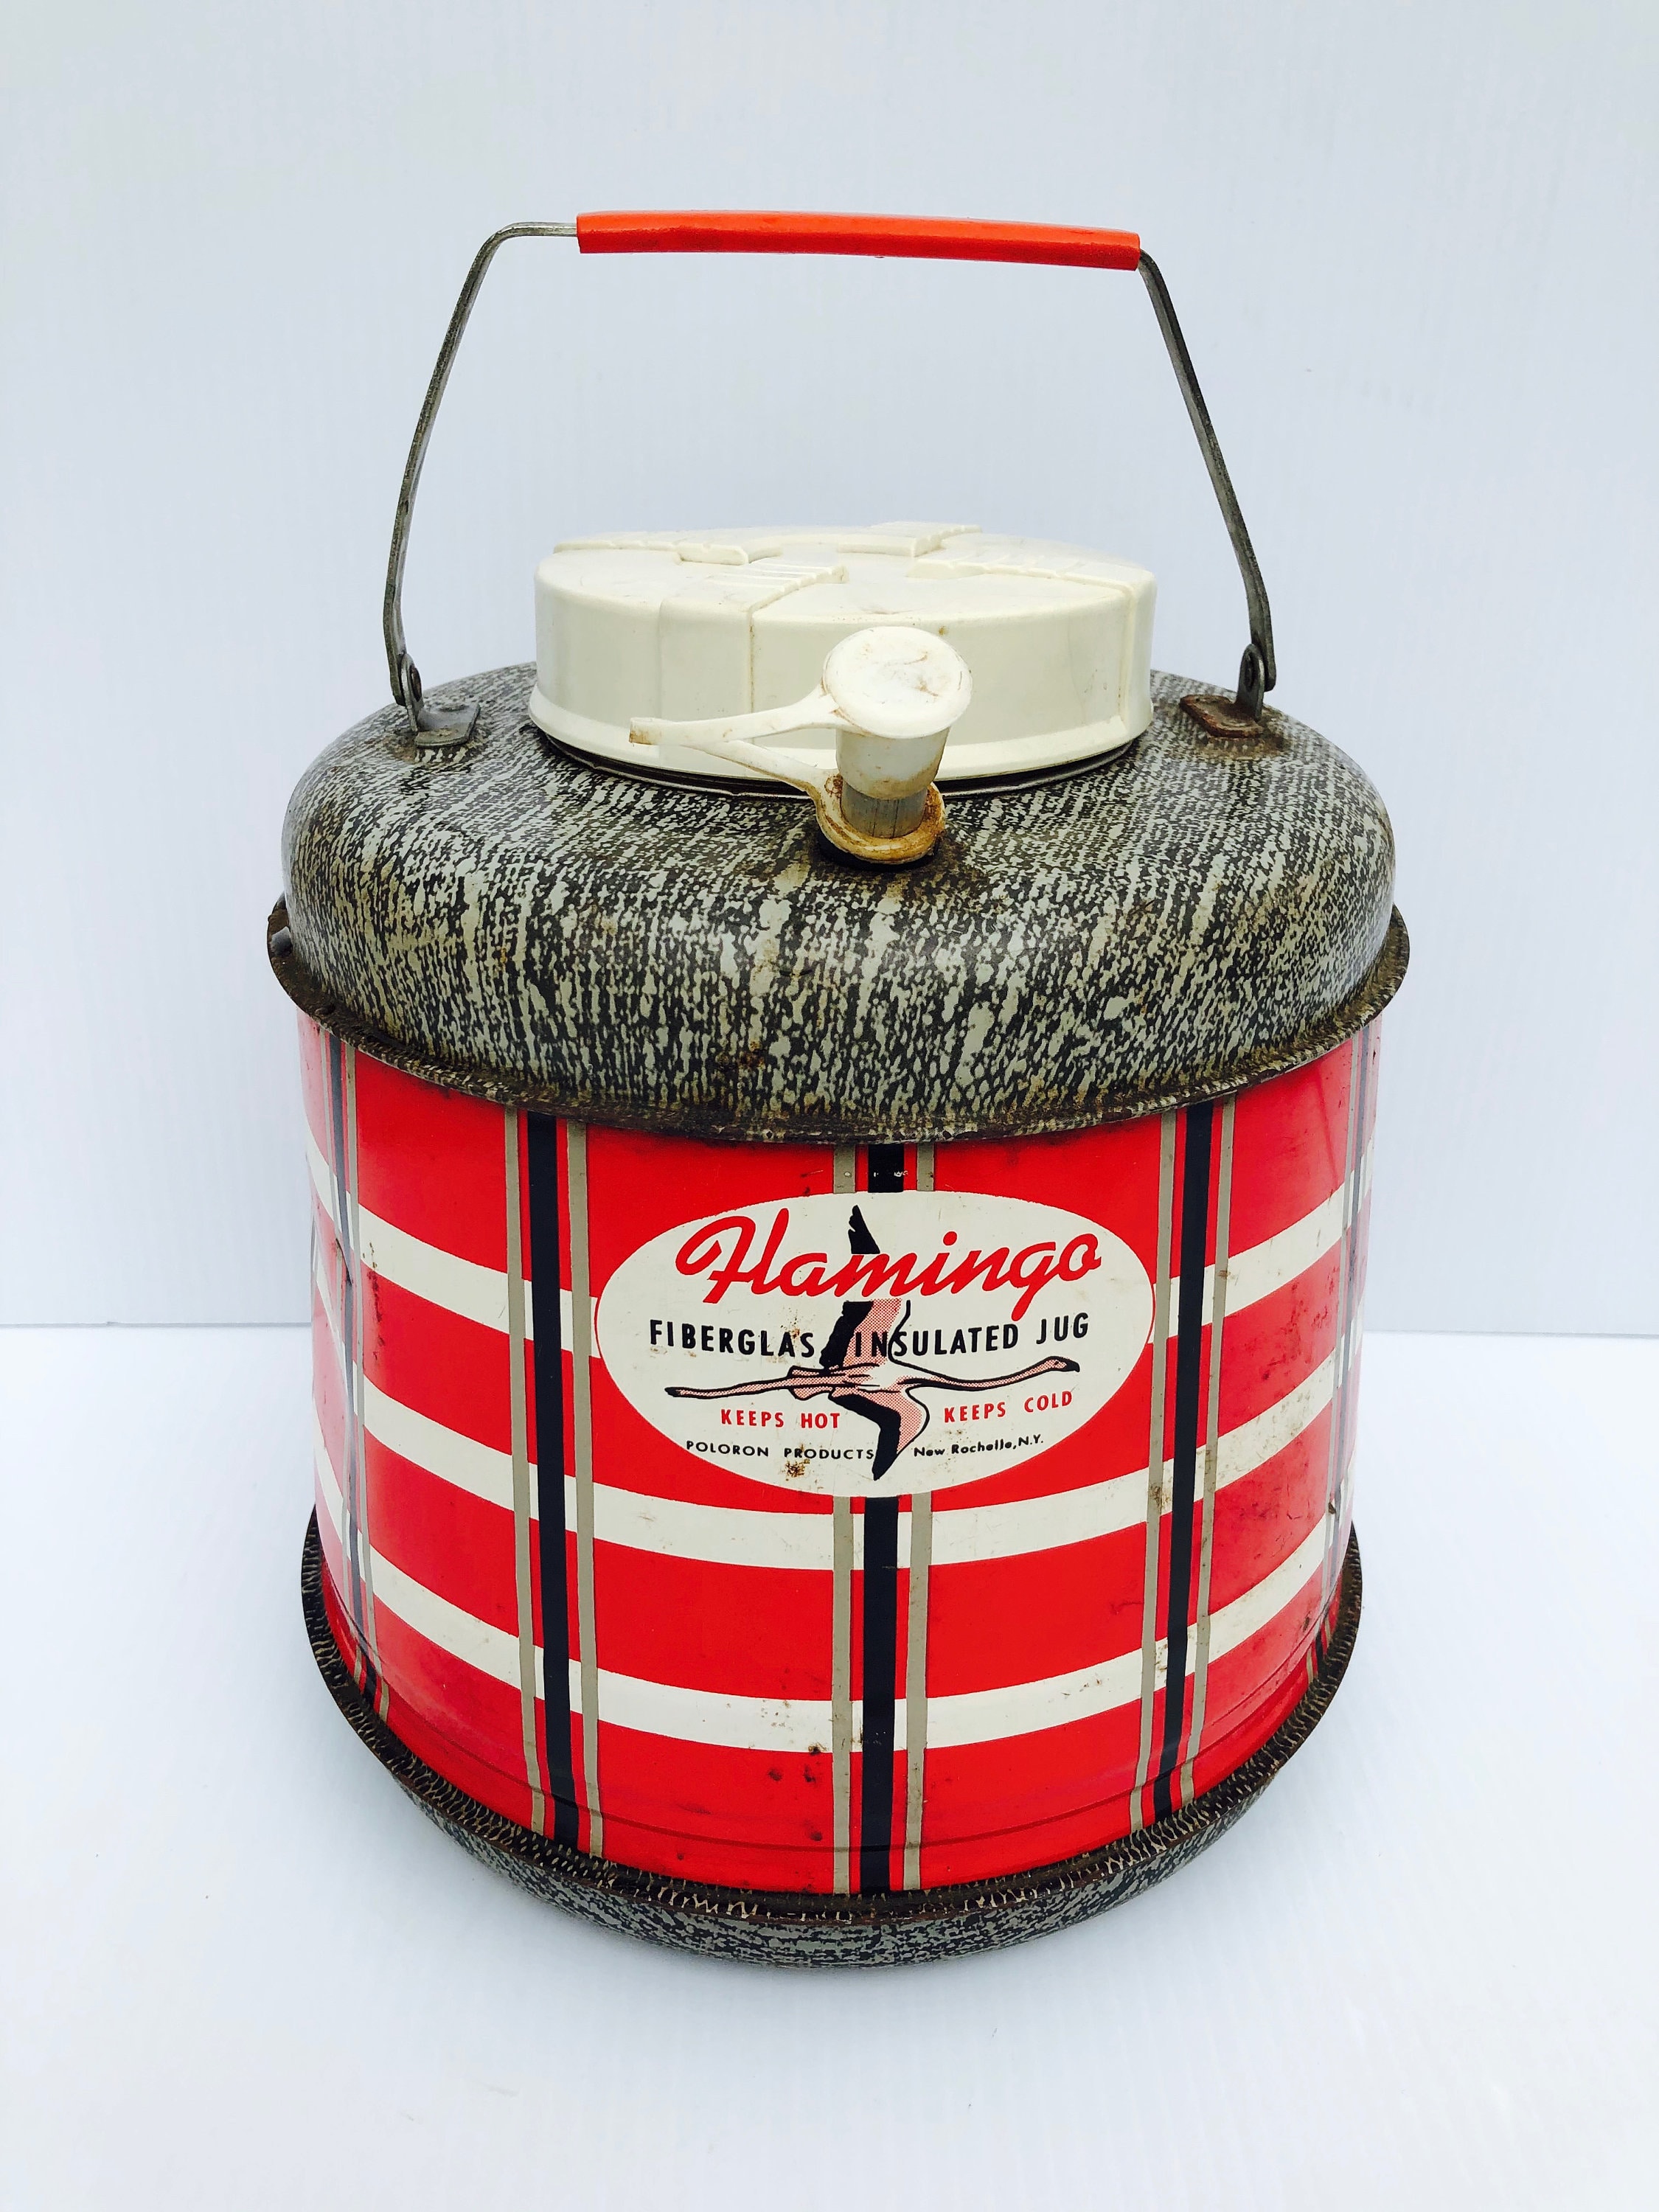 Vintage Flamingo Fiberglas Insulated Jug, Poltroon Products, Red Plaid and  Snake Skin Pattern, Eames Era, Keeps Beverages Hot or Cold -  Canada